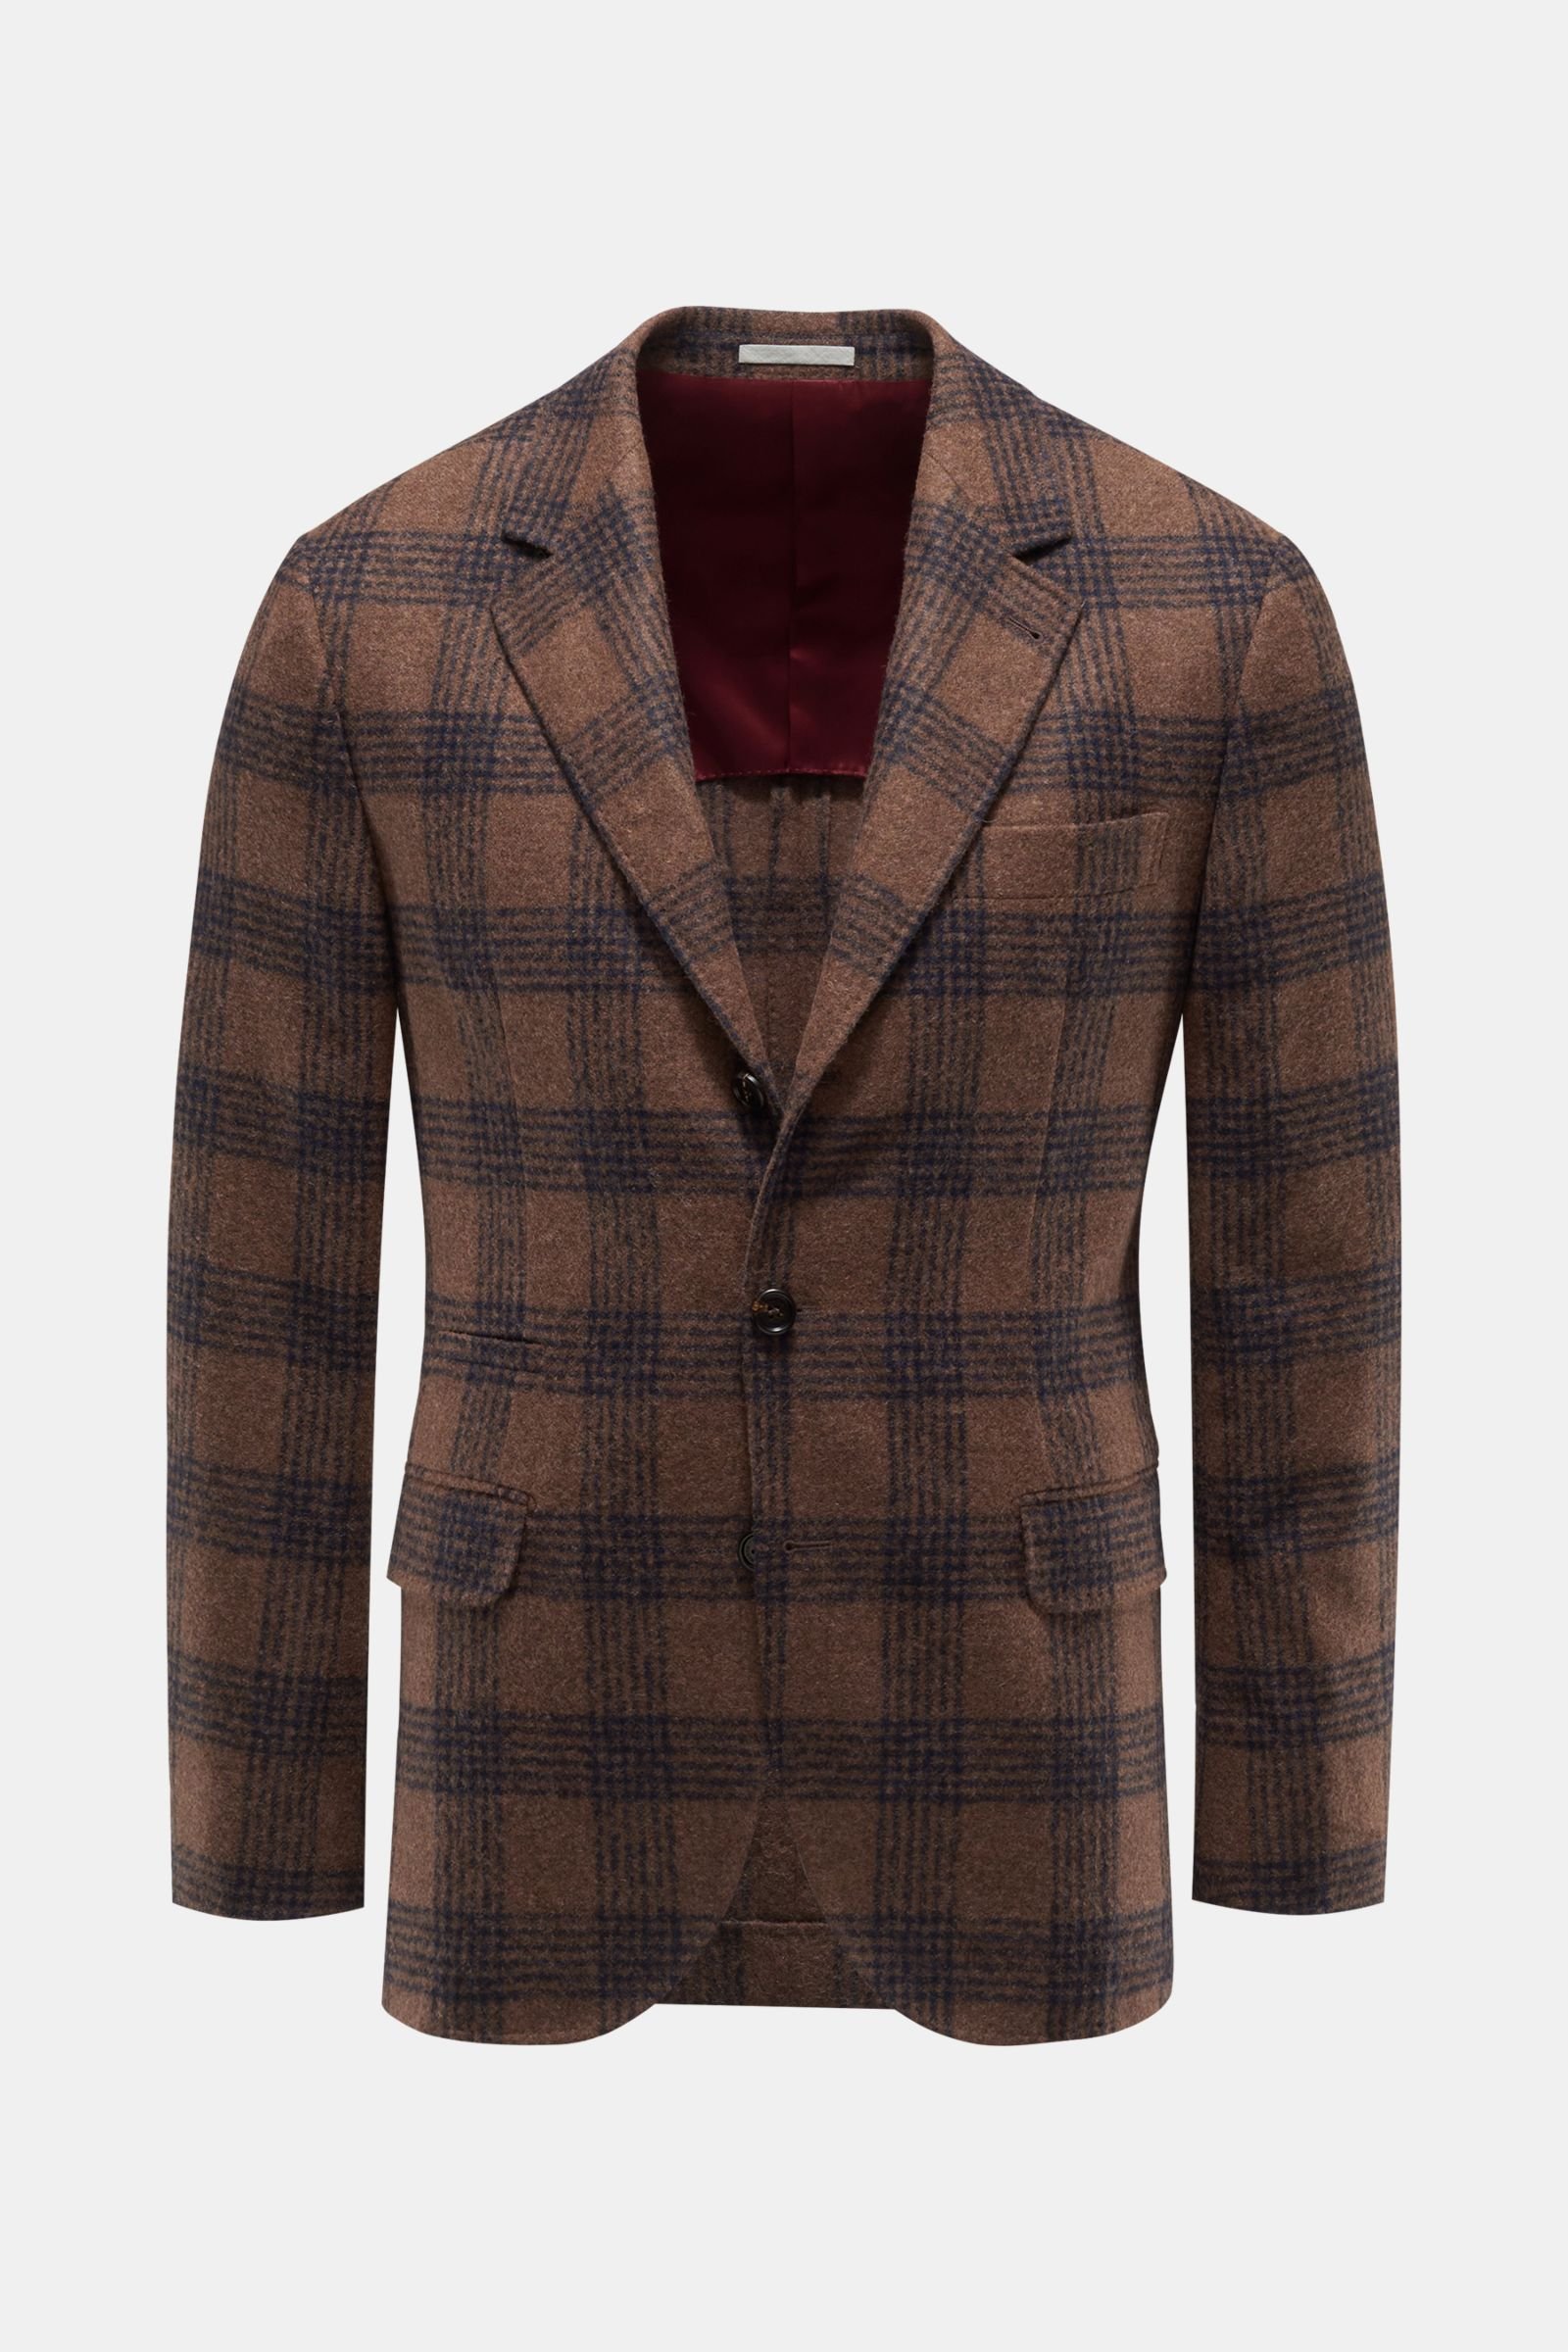 Smart-casual jacket brown/navy checked